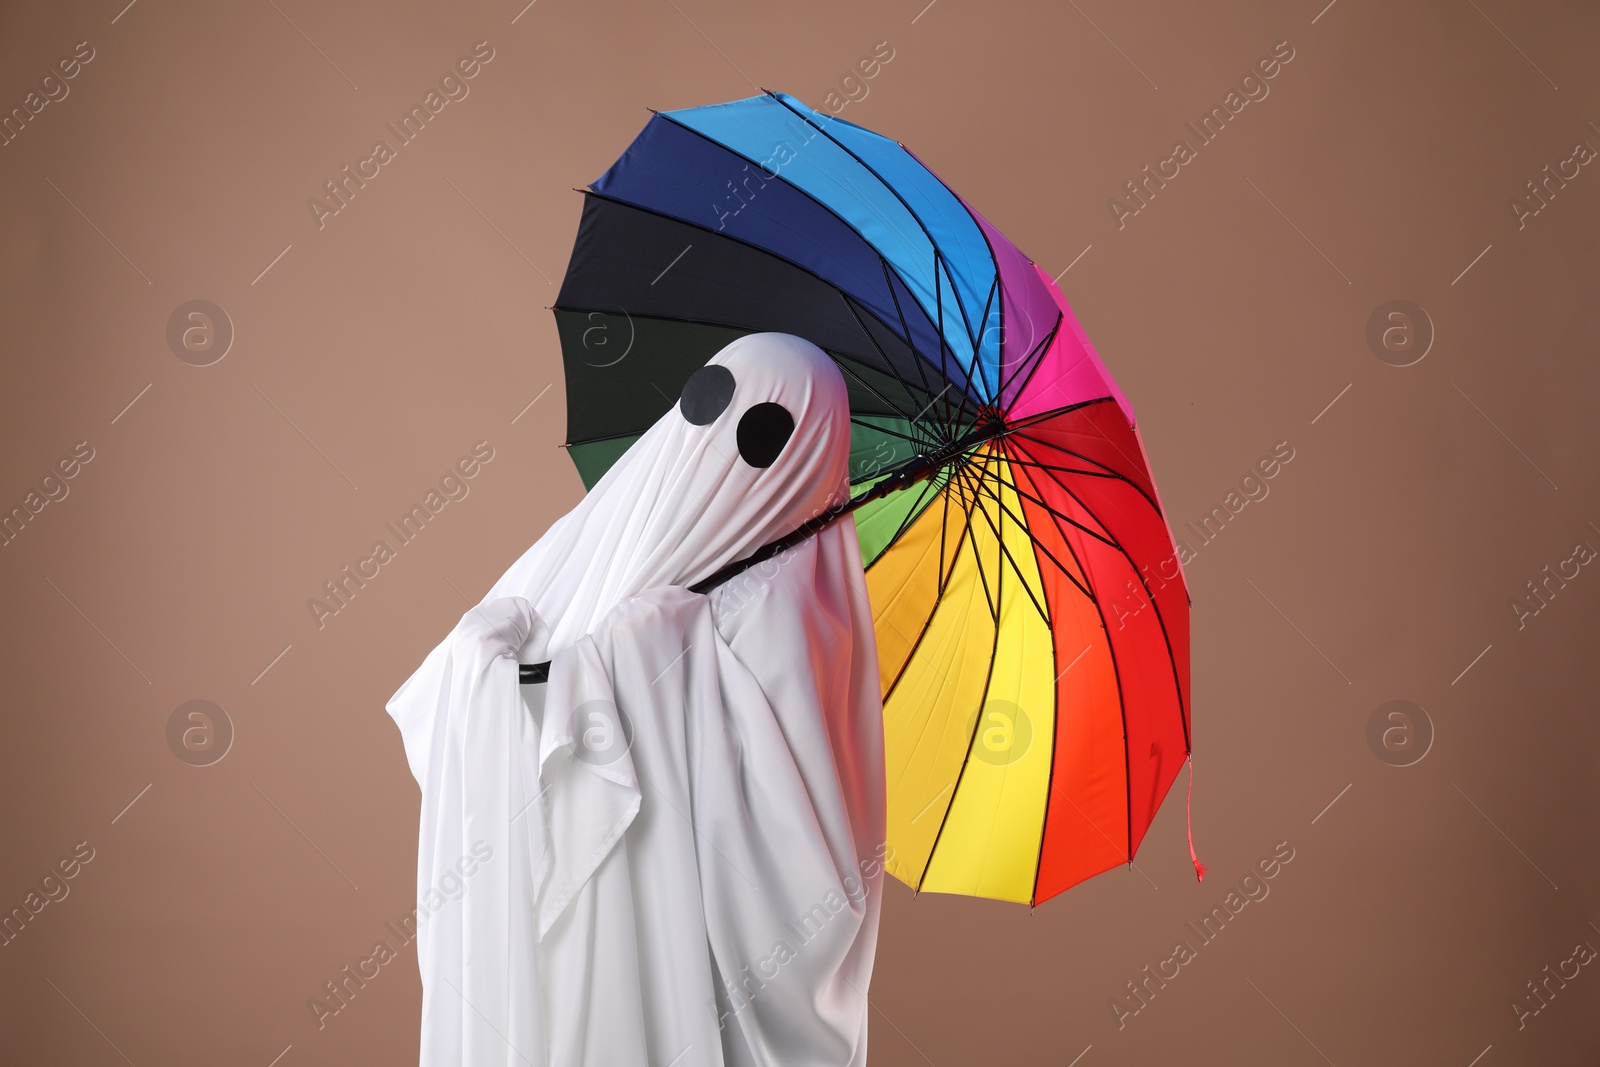 Photo of Person in ghost costume with rainbow umbrella on dark beige background